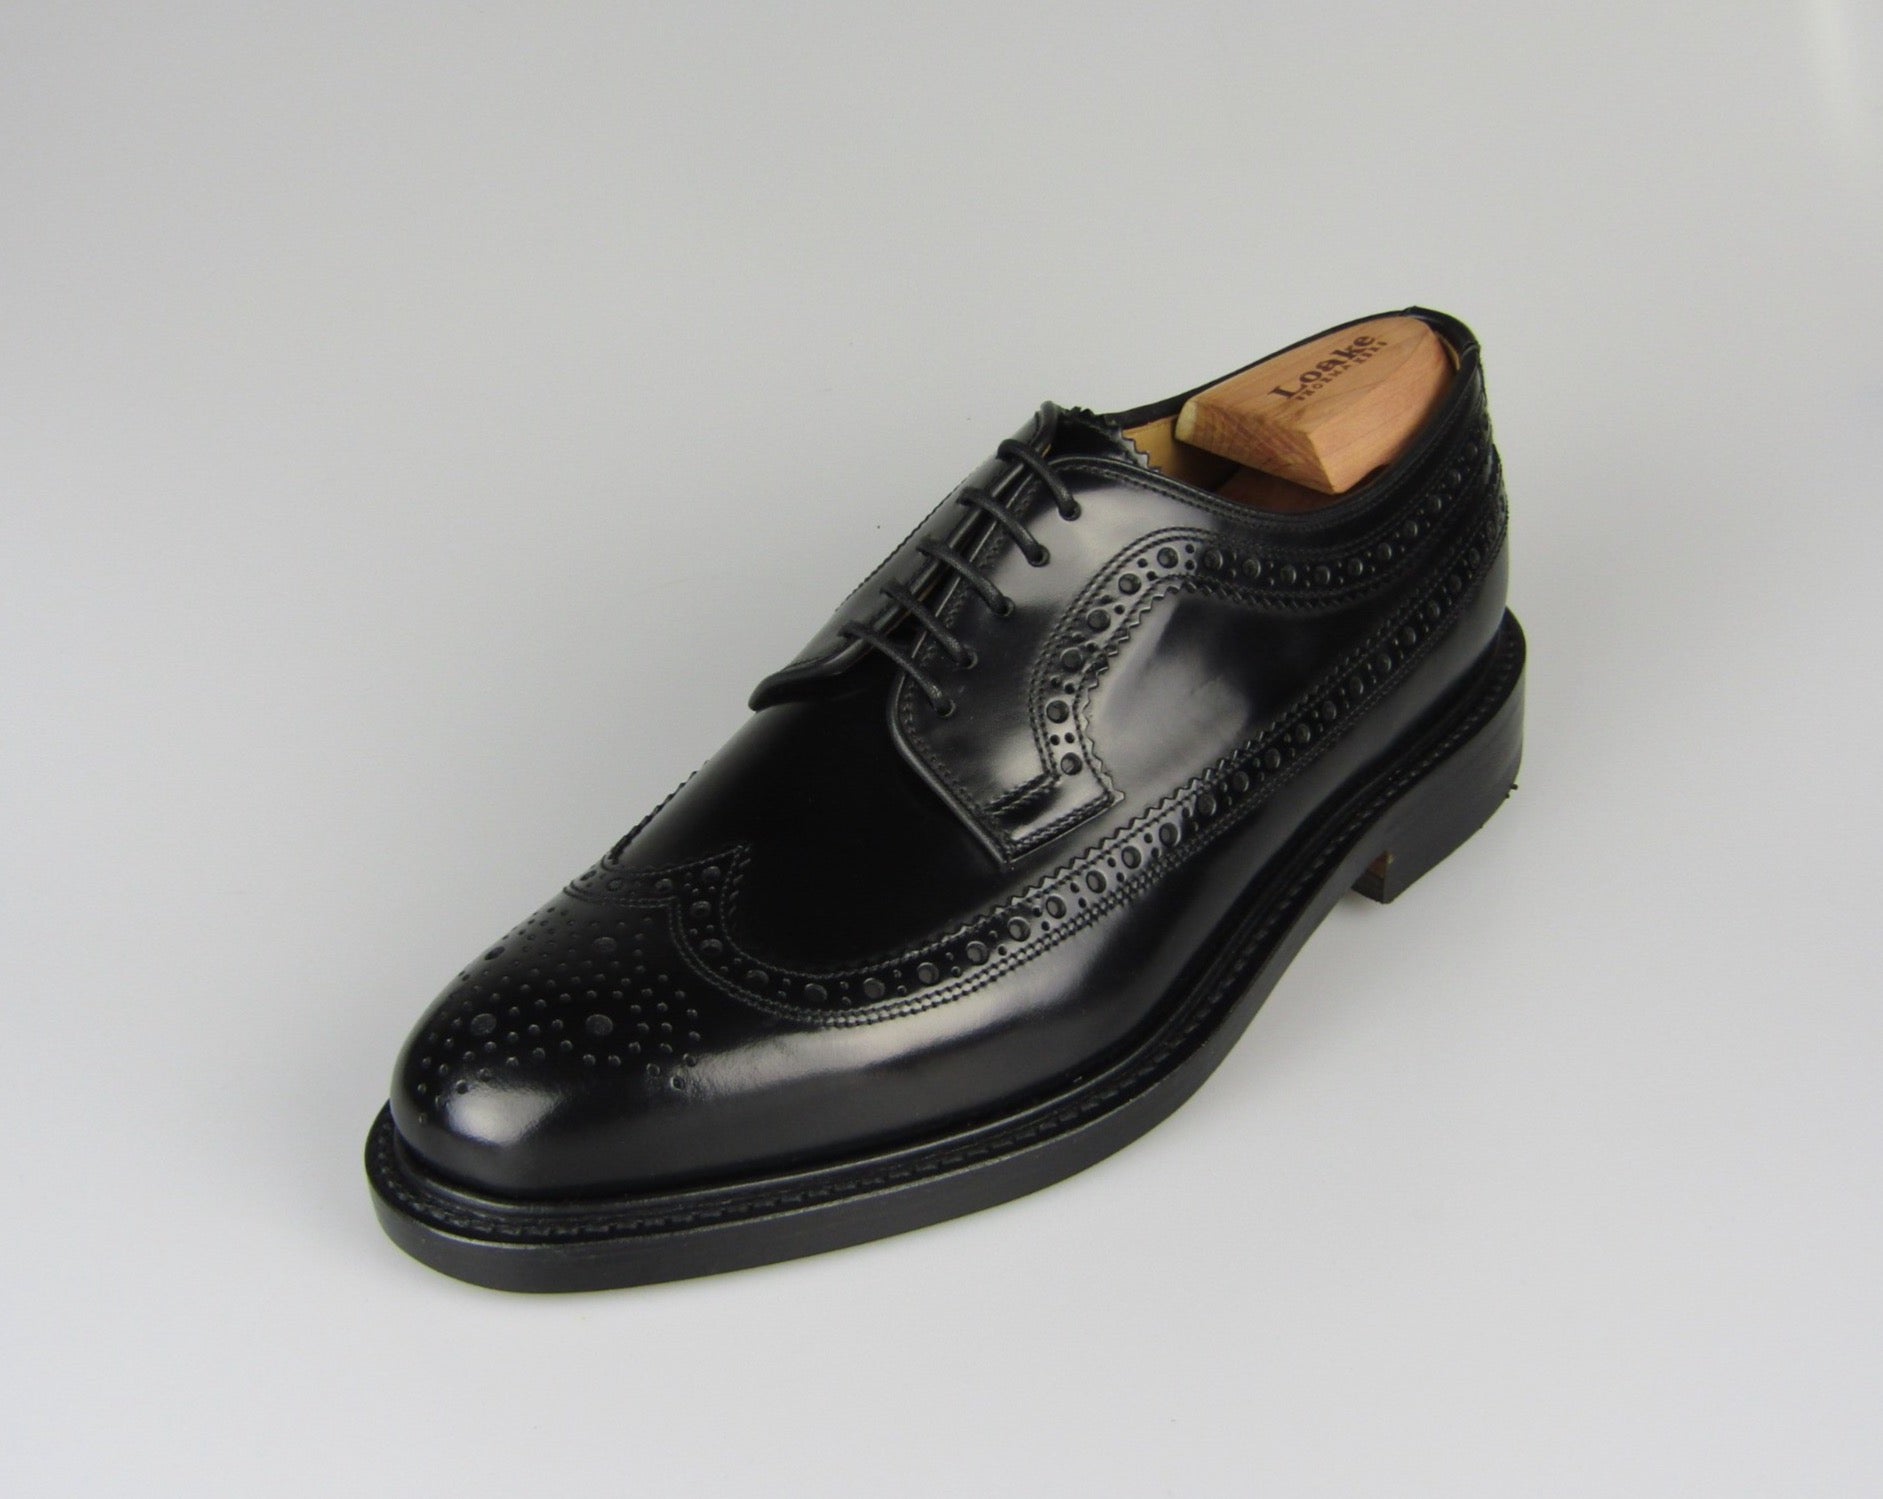 Loake Sovereign